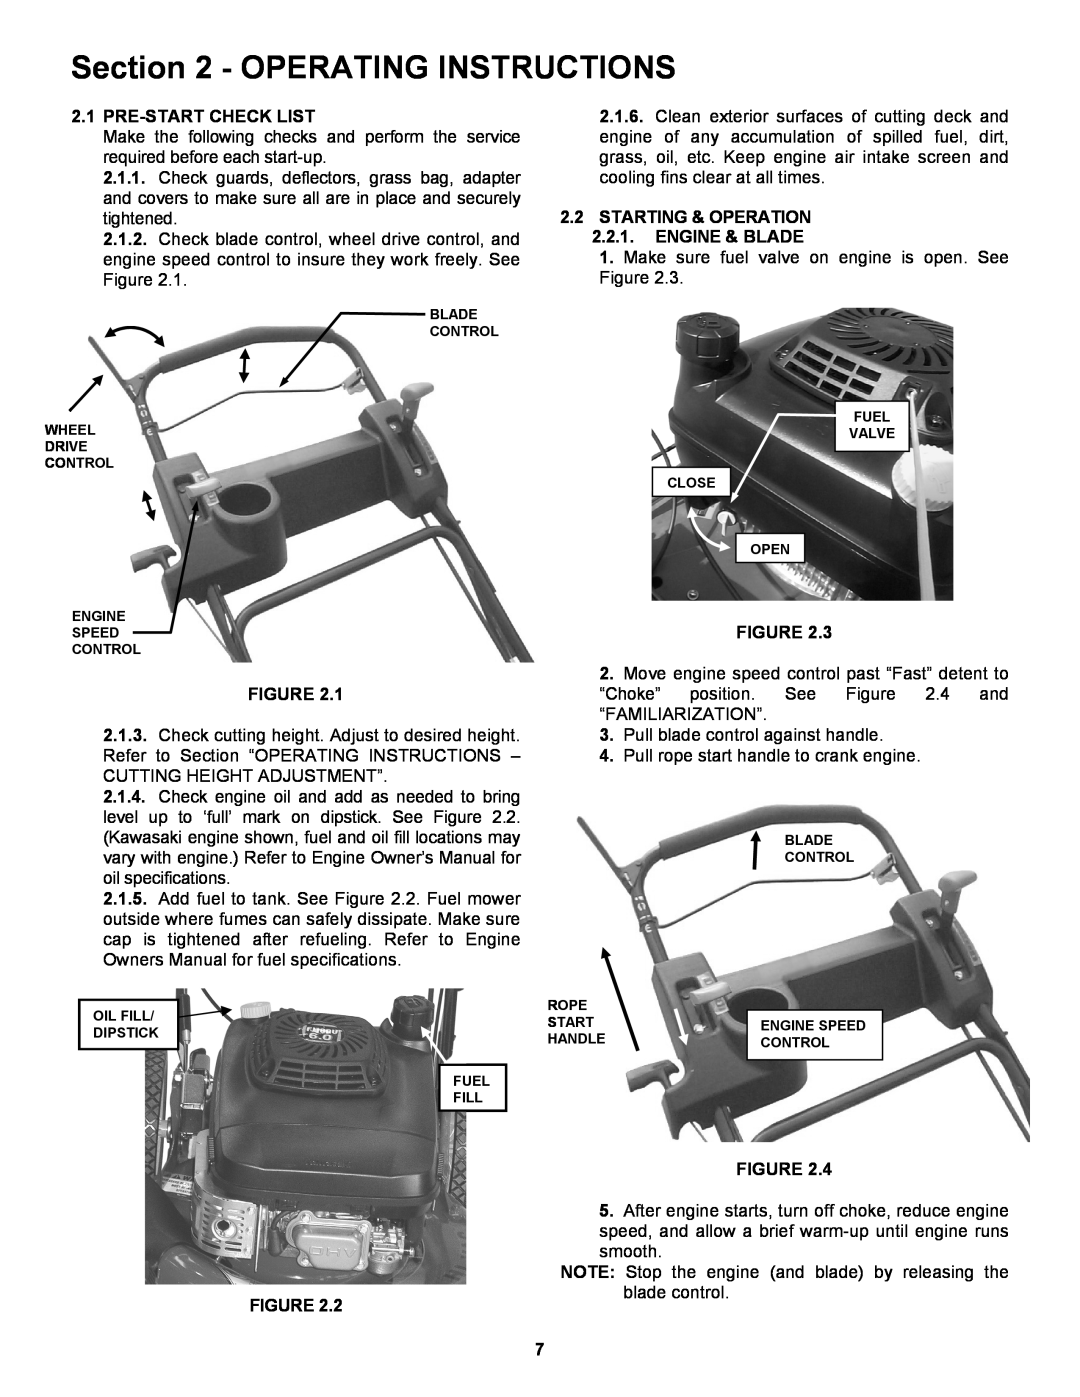 Snapper CRP216019KWV Operating Instructions, Pre-Start Check List, STARTING & OPERATION 2.2.1. ENGINE & BLADE 